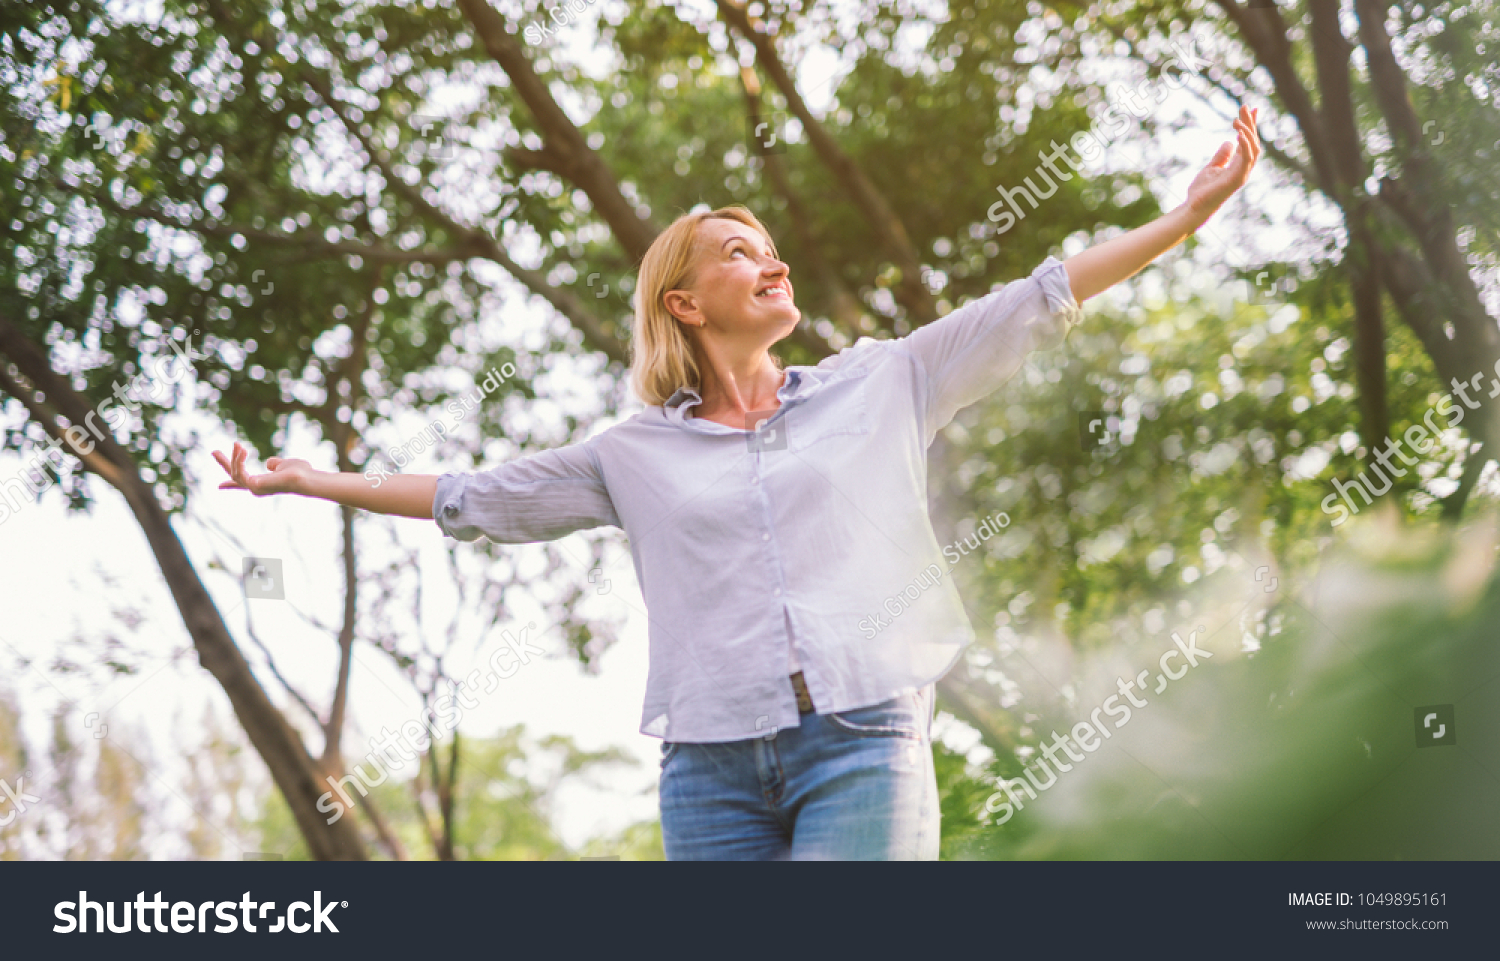 stock-photo-happy-woman-in-spring-or-summer-forest-park-open-arms-with-happiness-hope-and-vitality-caucasian-1049895161.jpg